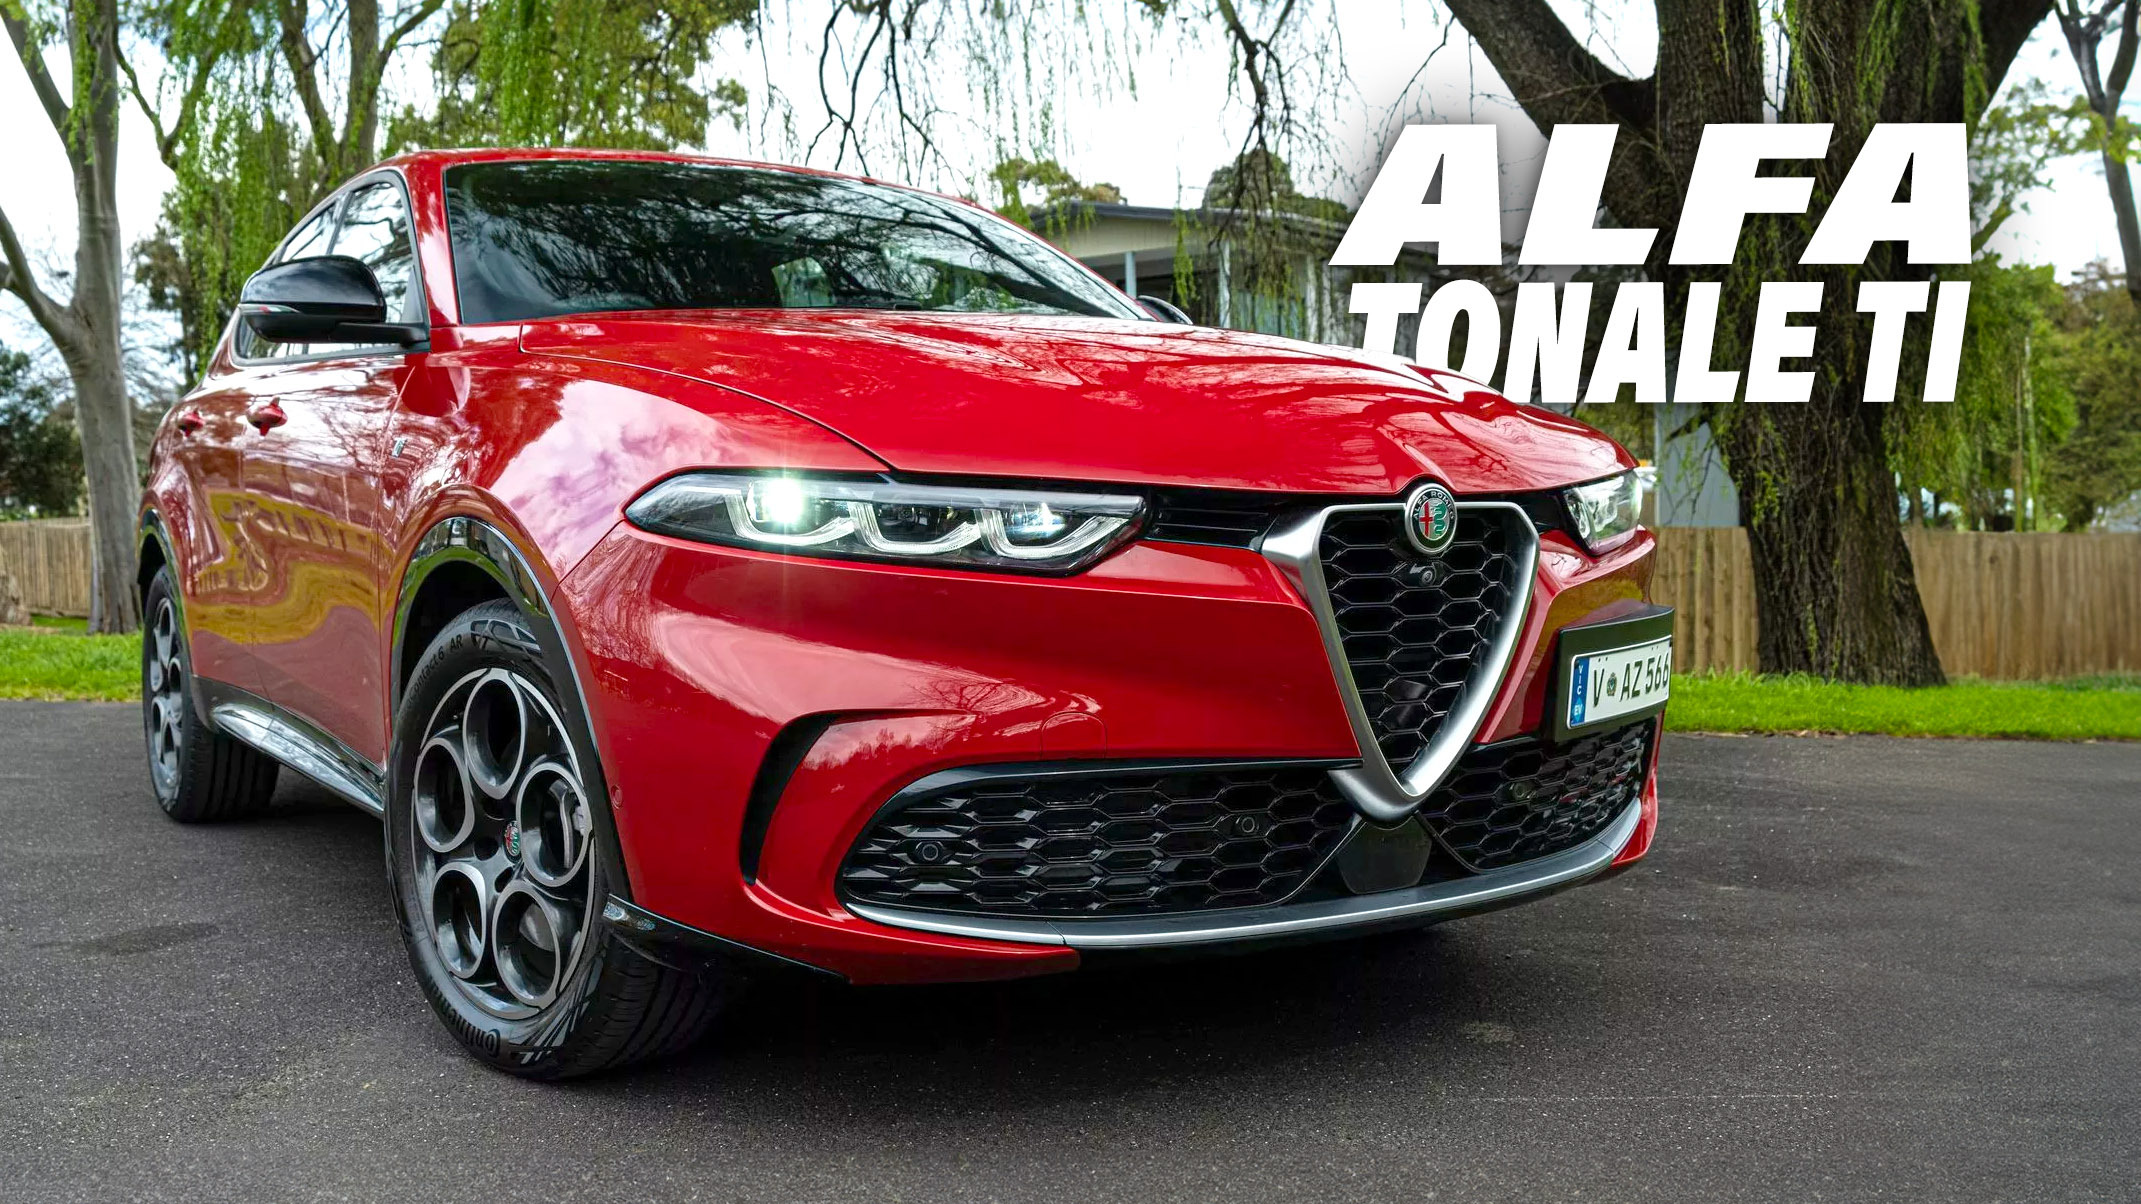 Driven: Is The 2023 Alfa Romeo Tonale Hybrid Ti A Case Of Style Over  Substance?